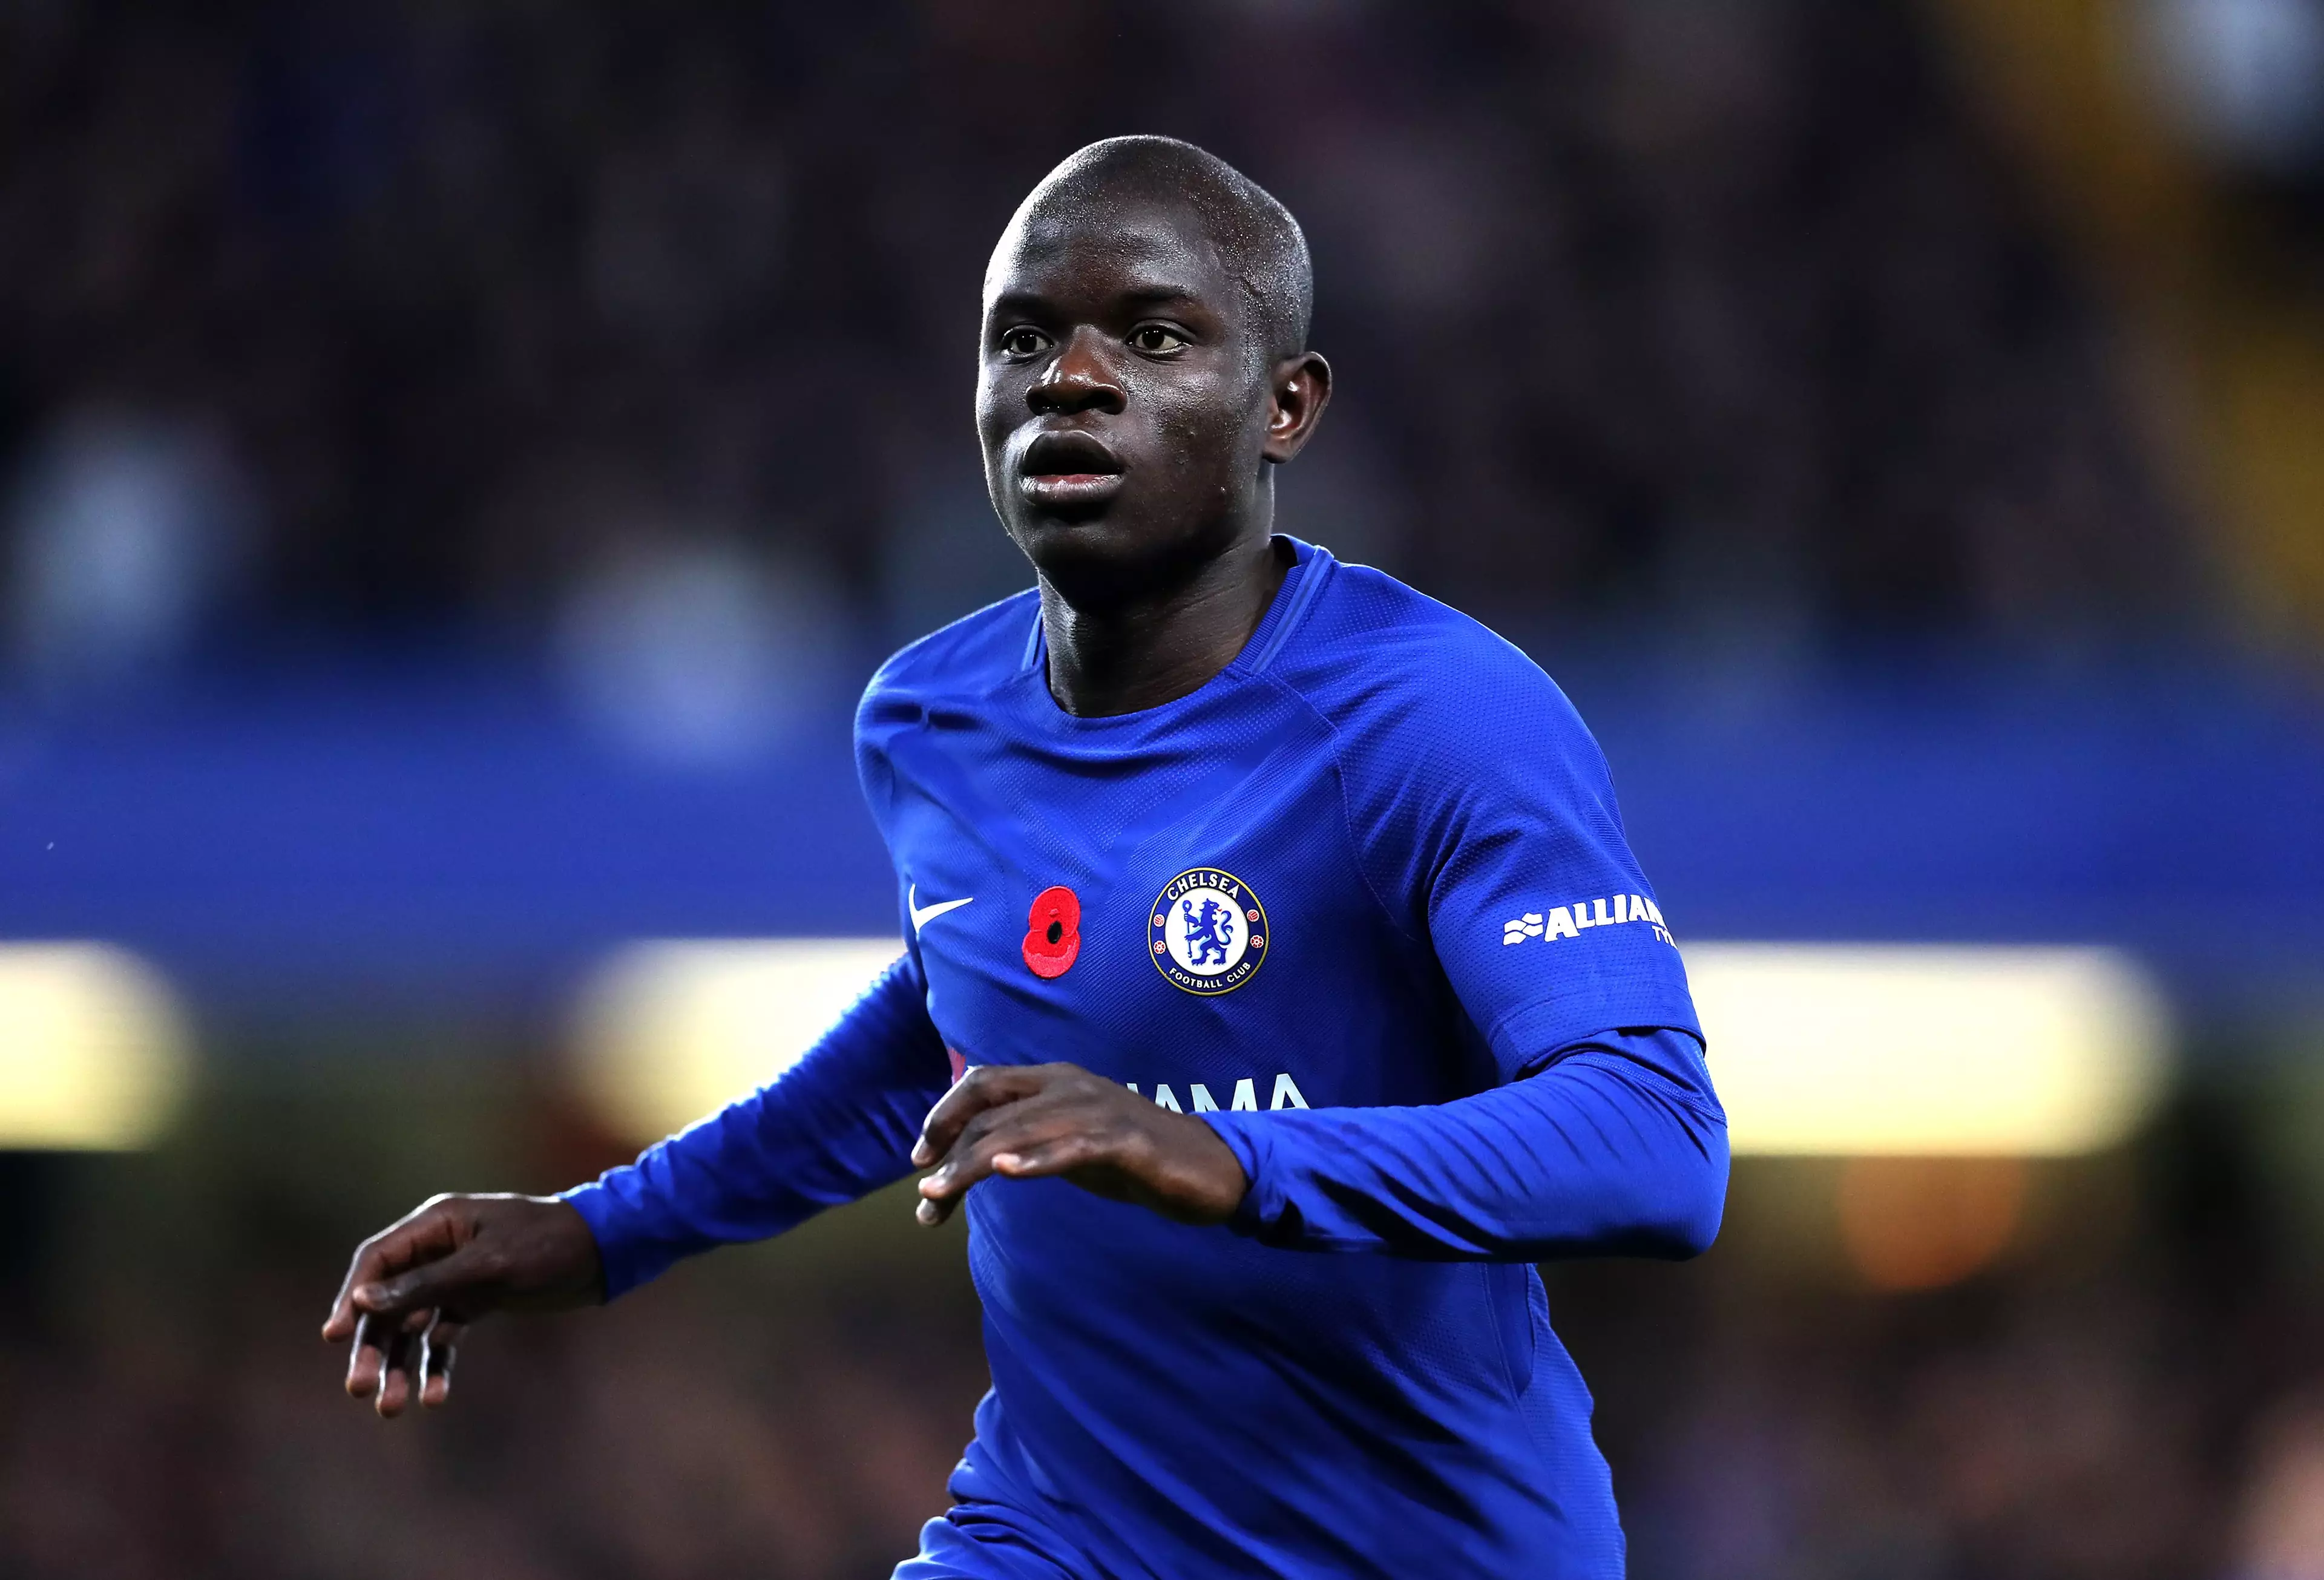 Kante could be up against Suarez for a place in the team. Image: PA Images